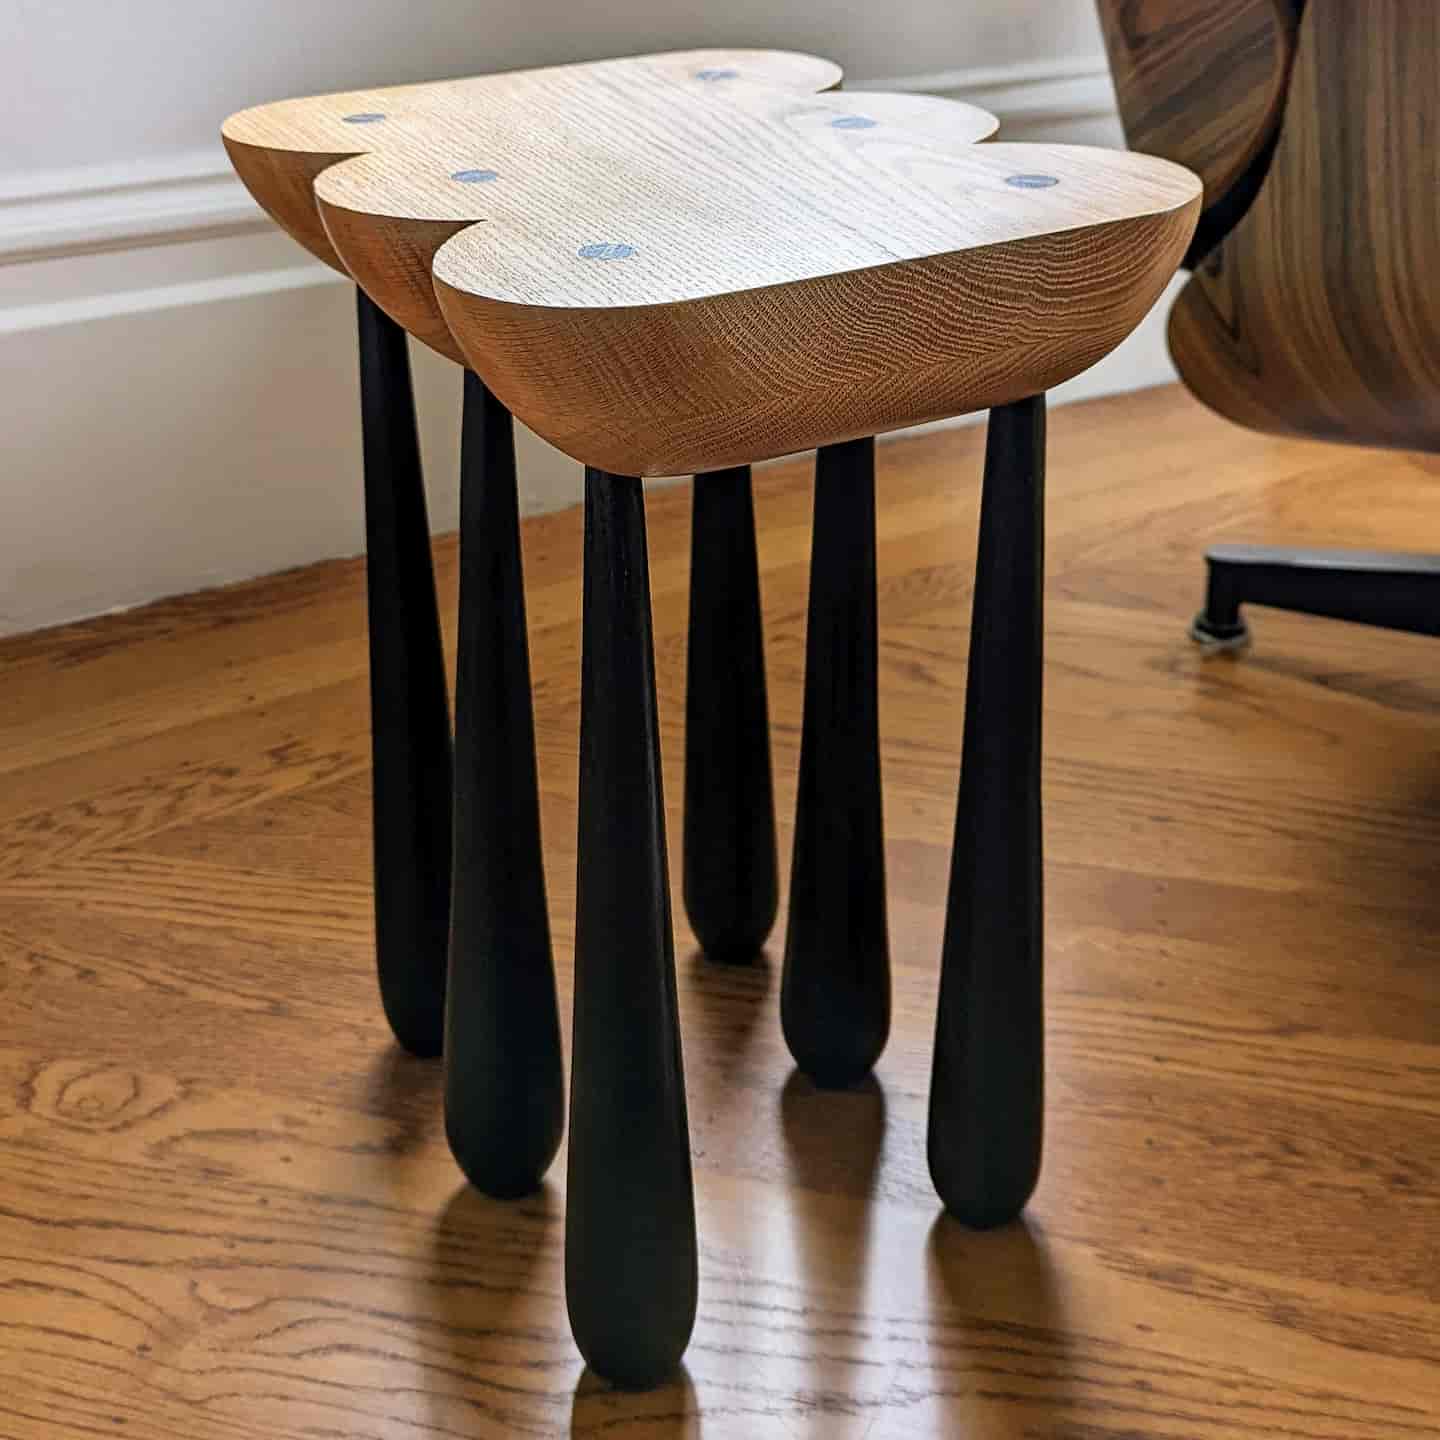 View of shaped side table with six legs